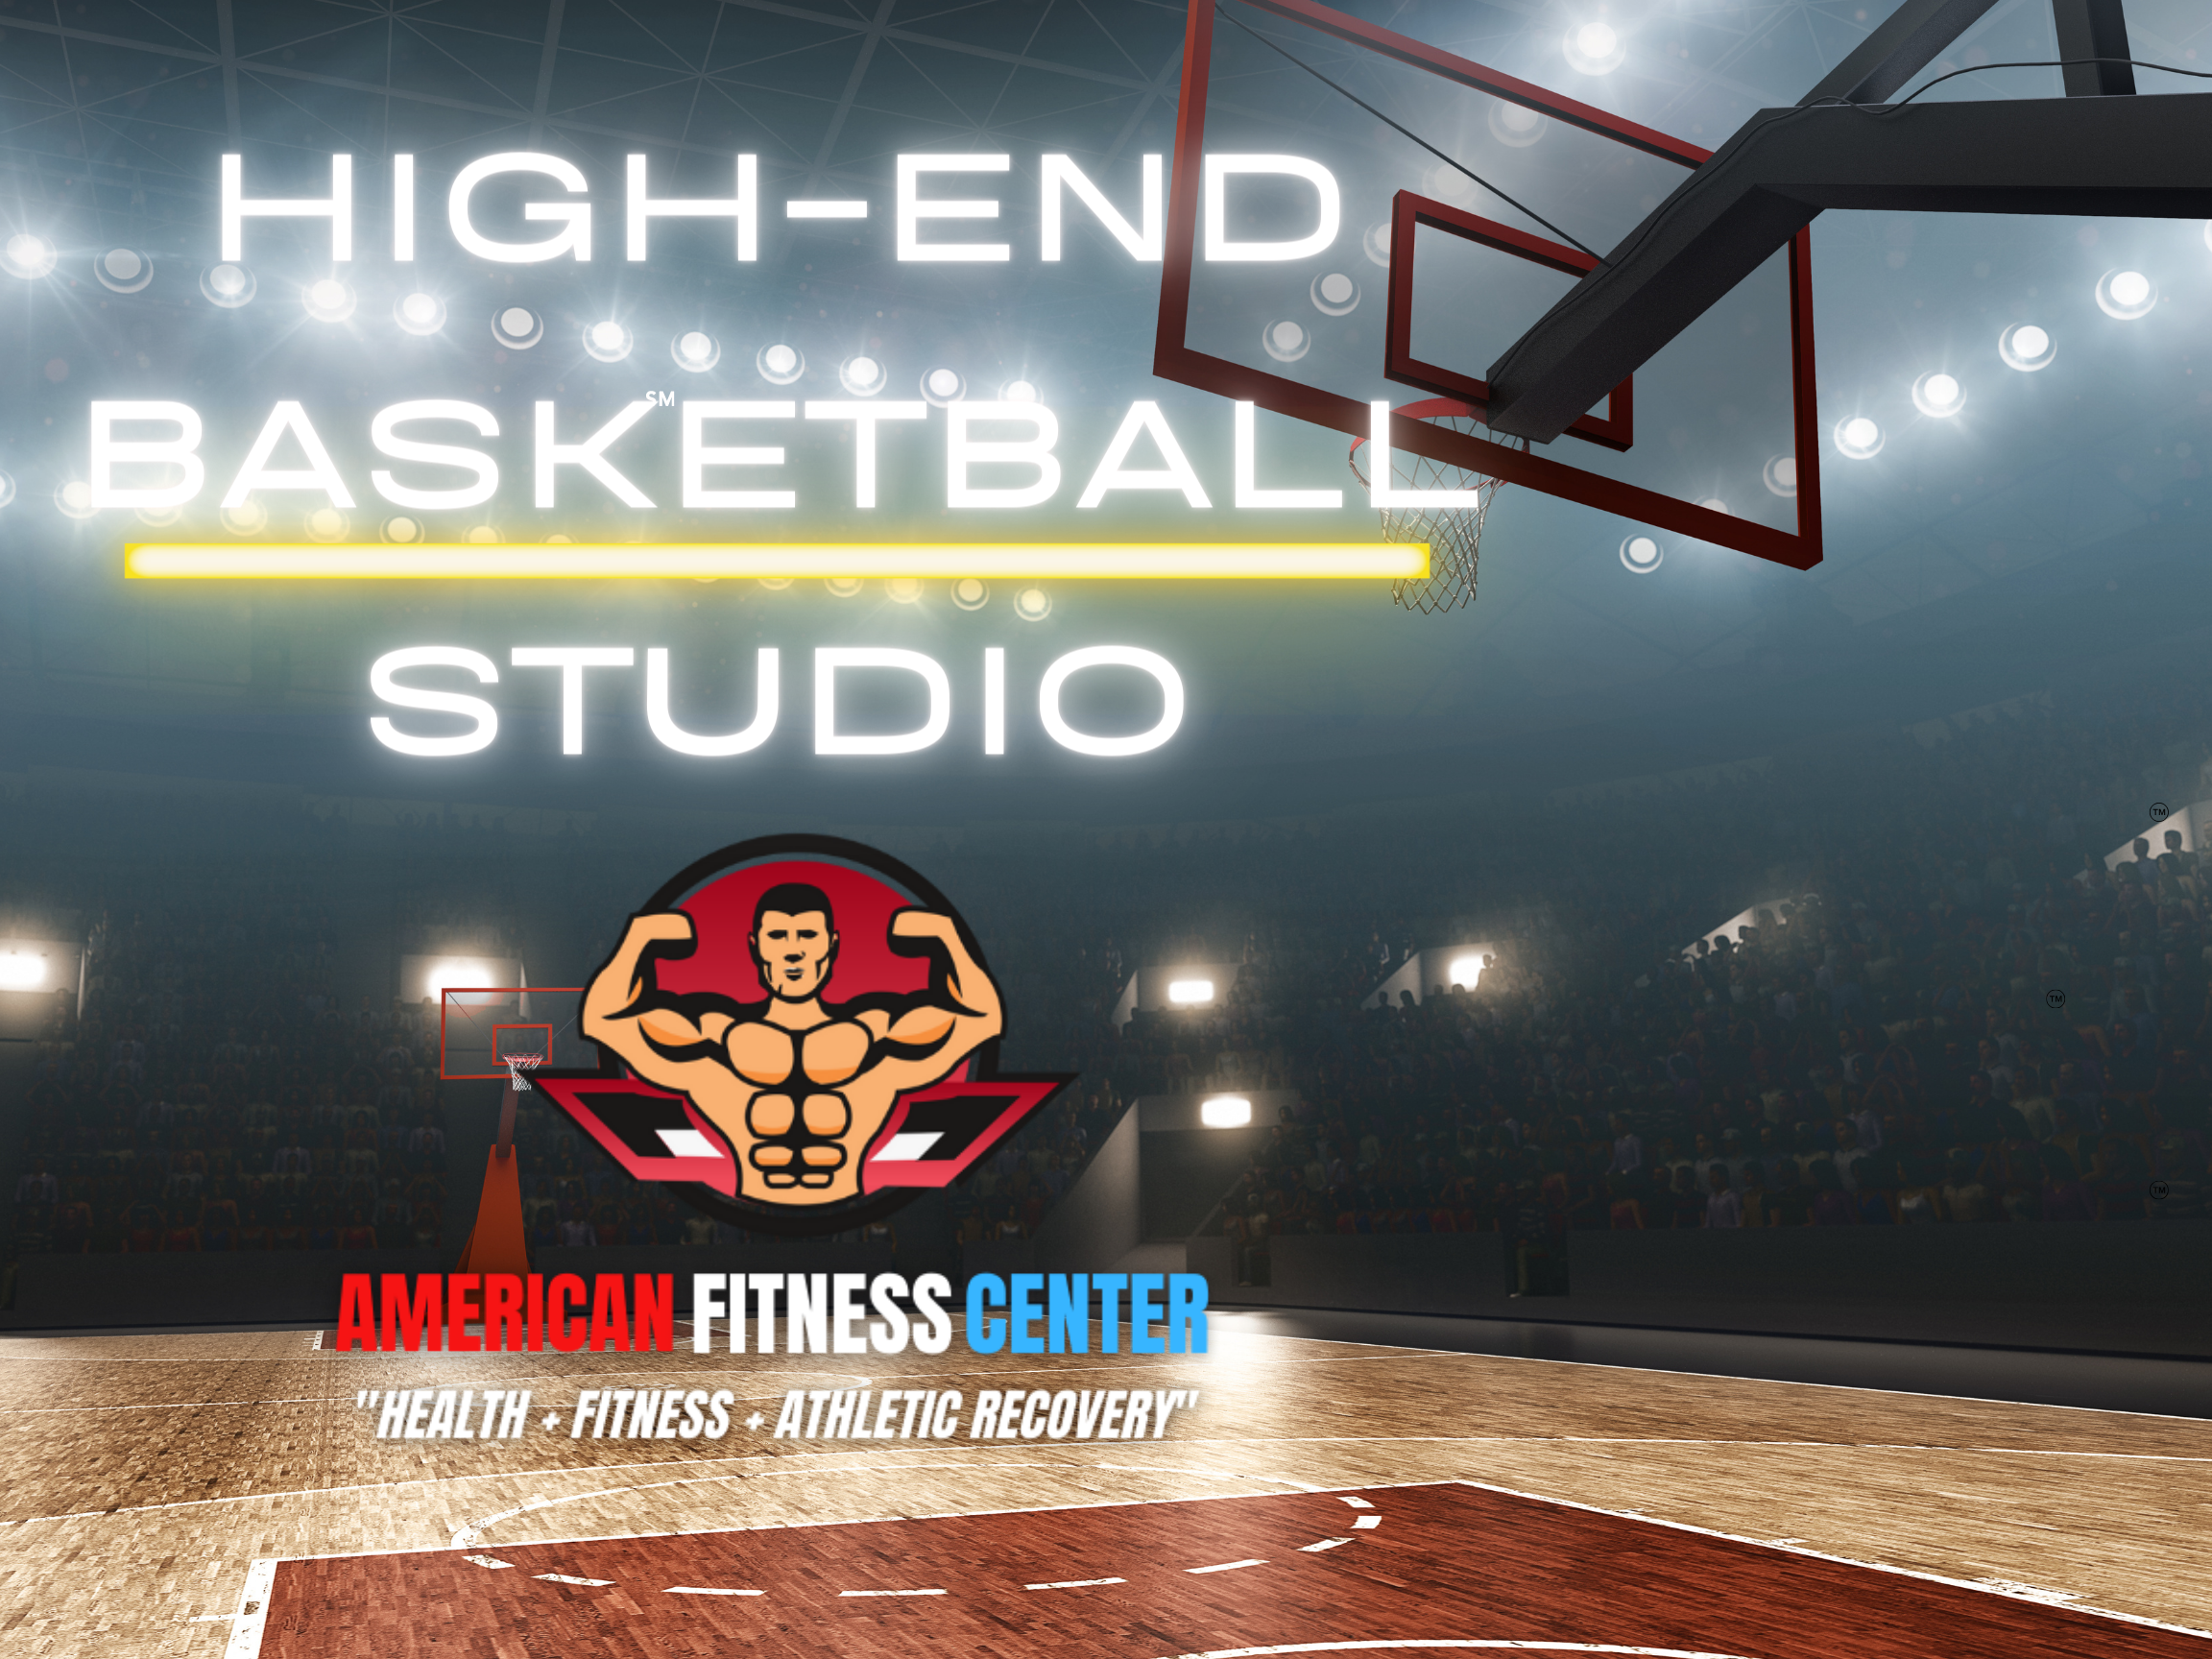 24-Hour-Gym-With-Basketball-Court-Near-Me-in-Roswell-GA-American-Fitness-Center-West-Roswell